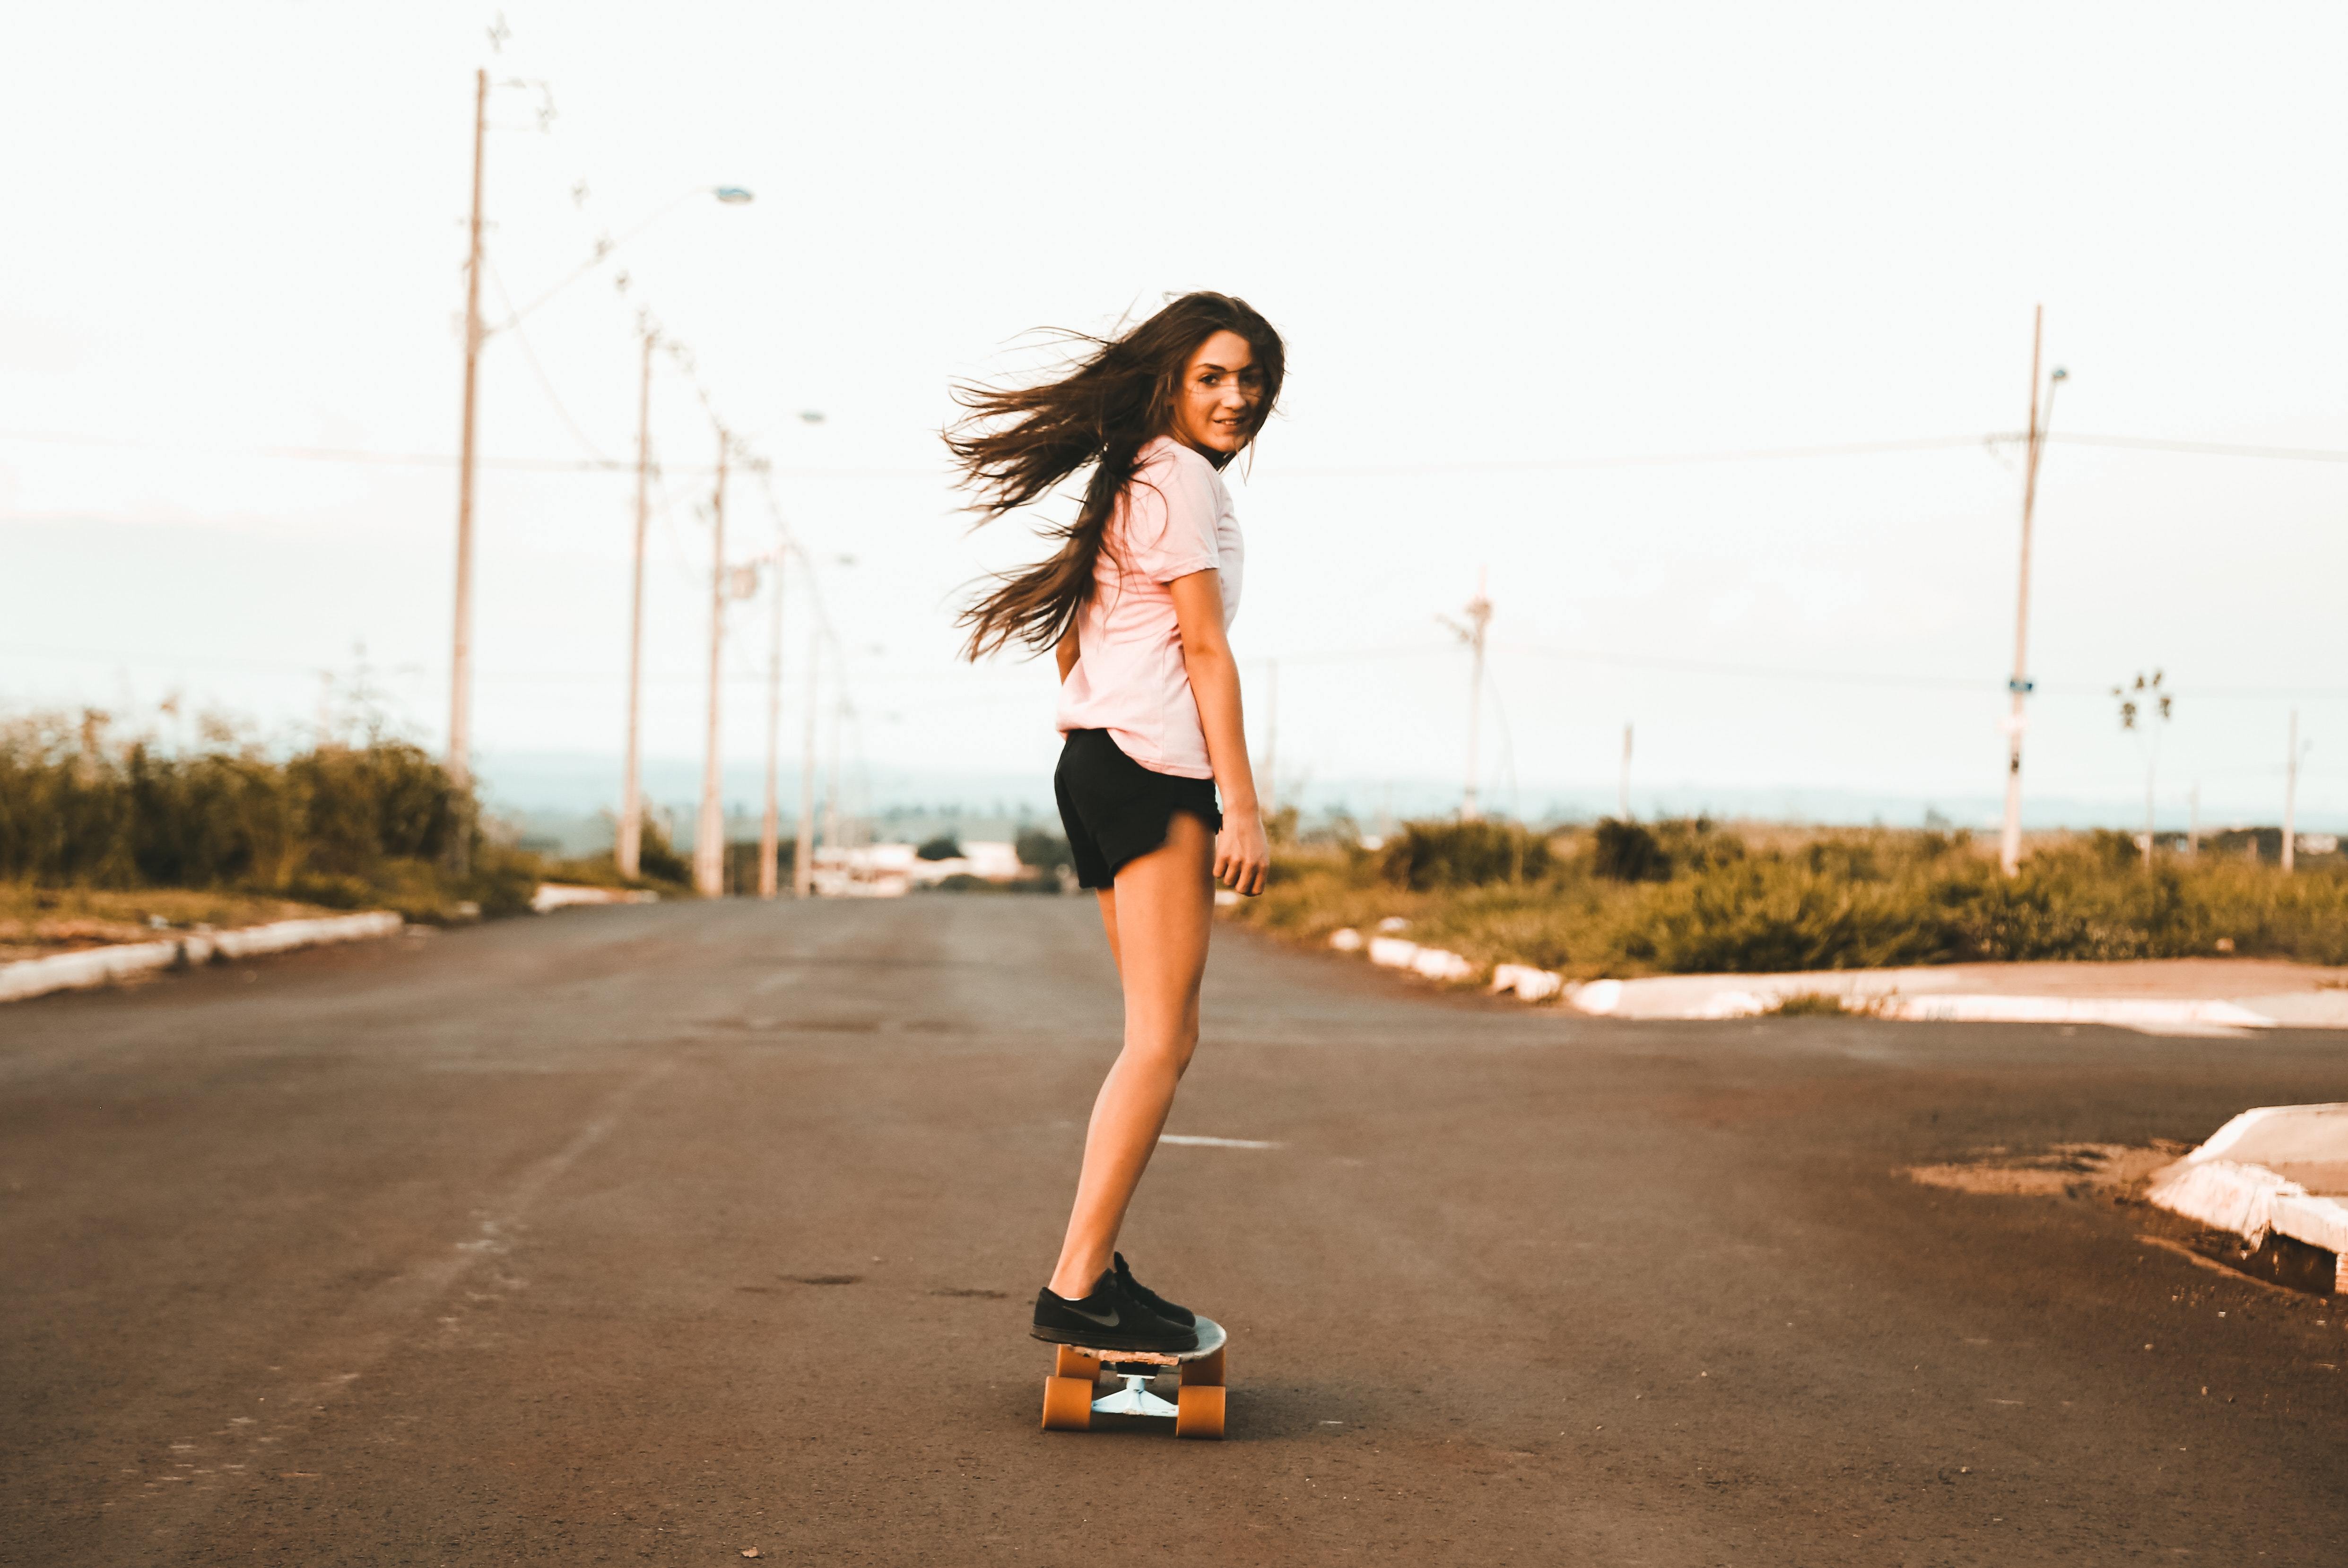 Woman Riding Skateboard At The Road 5k Hd Photography - Skateboard Girl , HD Wallpaper & Backgrounds